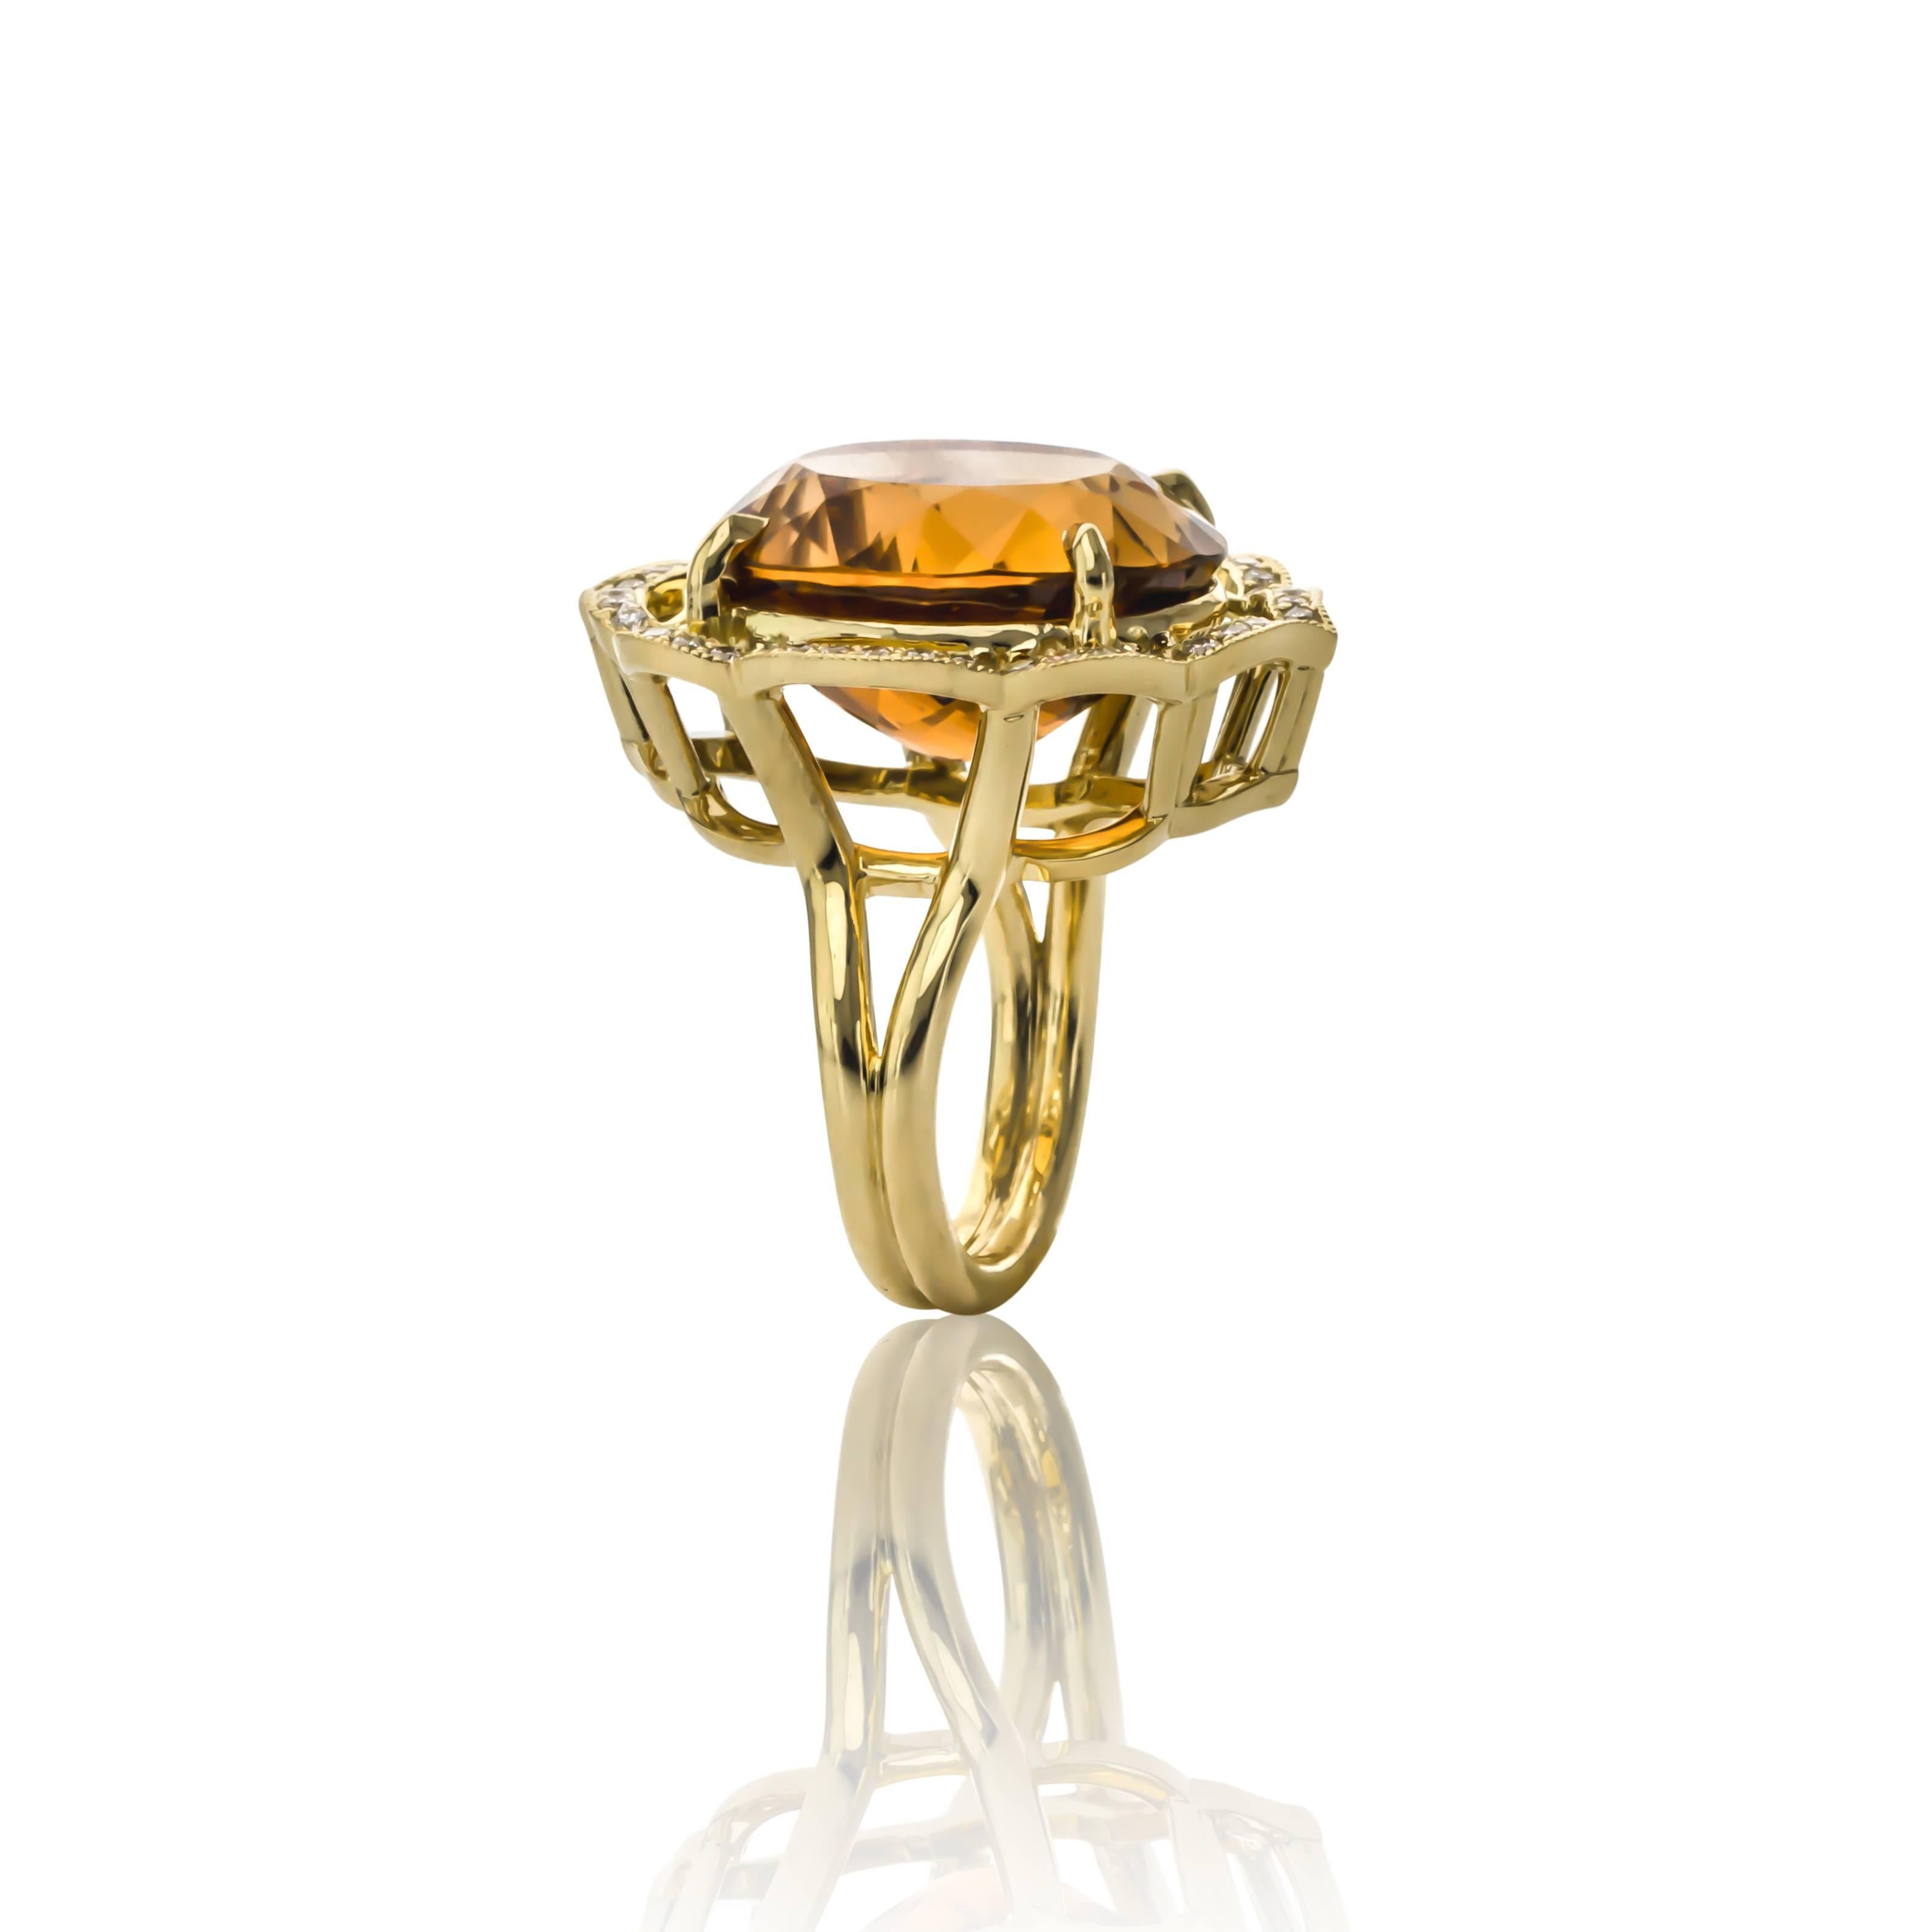 One of a Kind 23.27 Carat Orange Tourmaline Diamond Gold Cocktail Ring In Excellent Condition For Sale In Richardson, TX